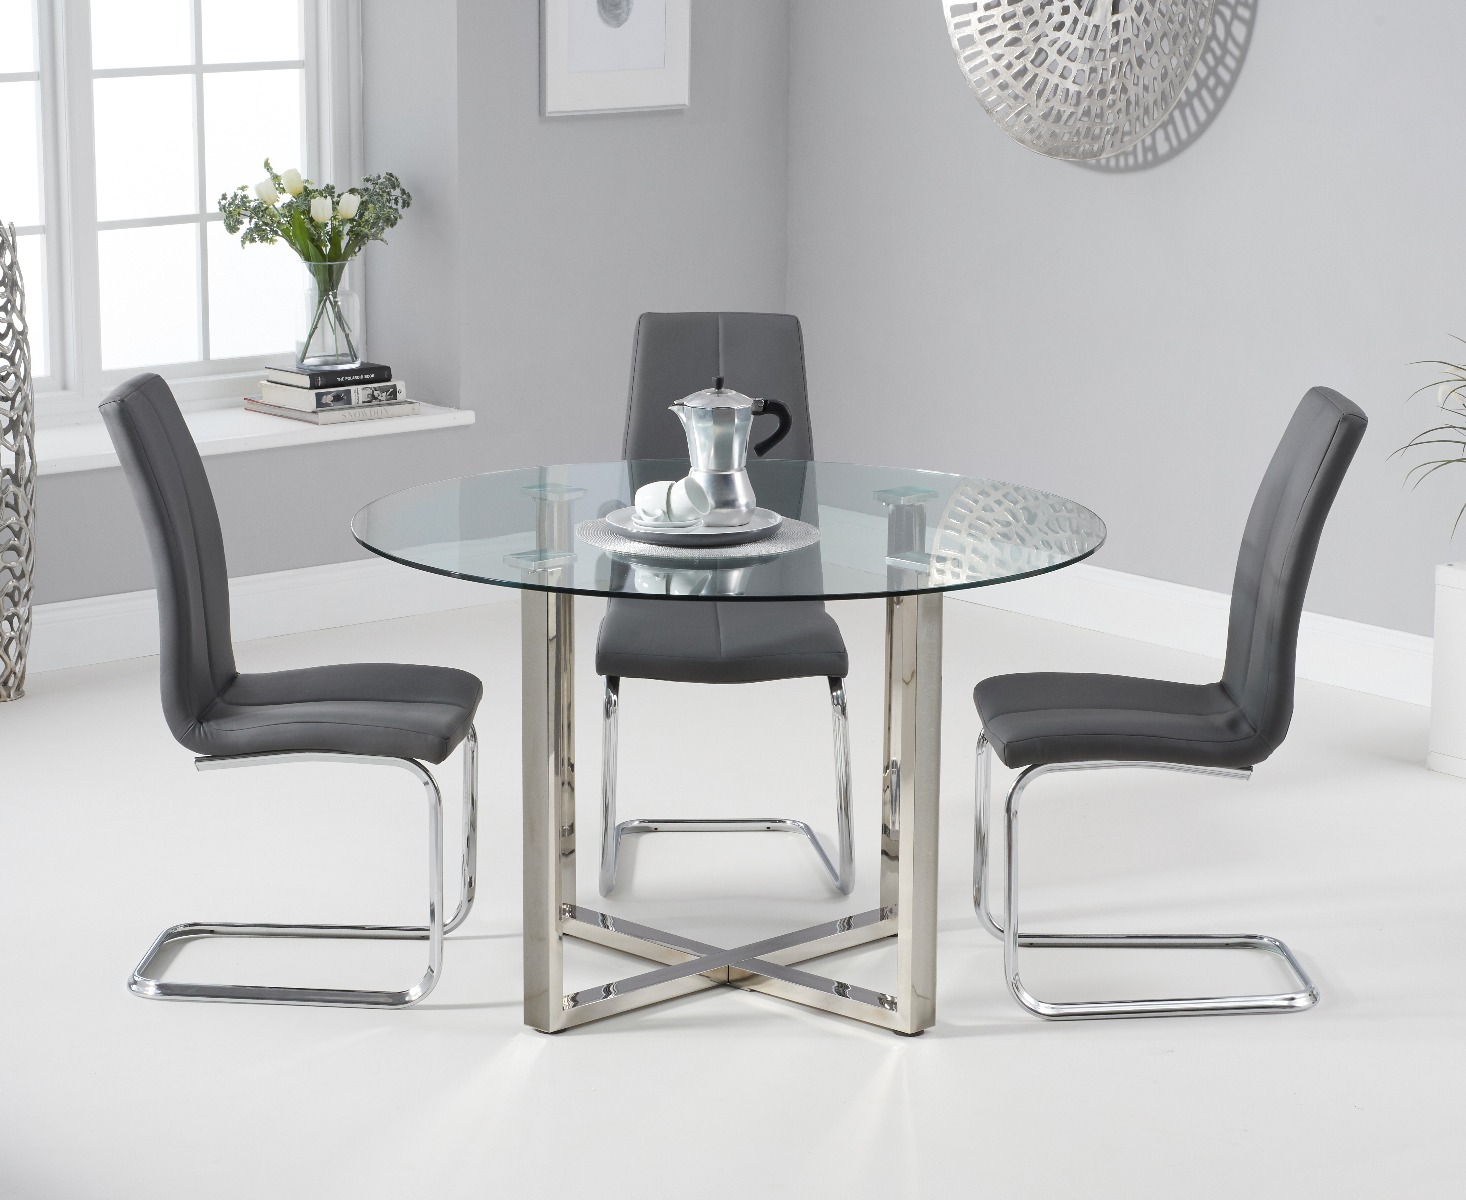 Vaso 120cm Round Glass Dining Table With 4 Grey Tarin Dining Chairs